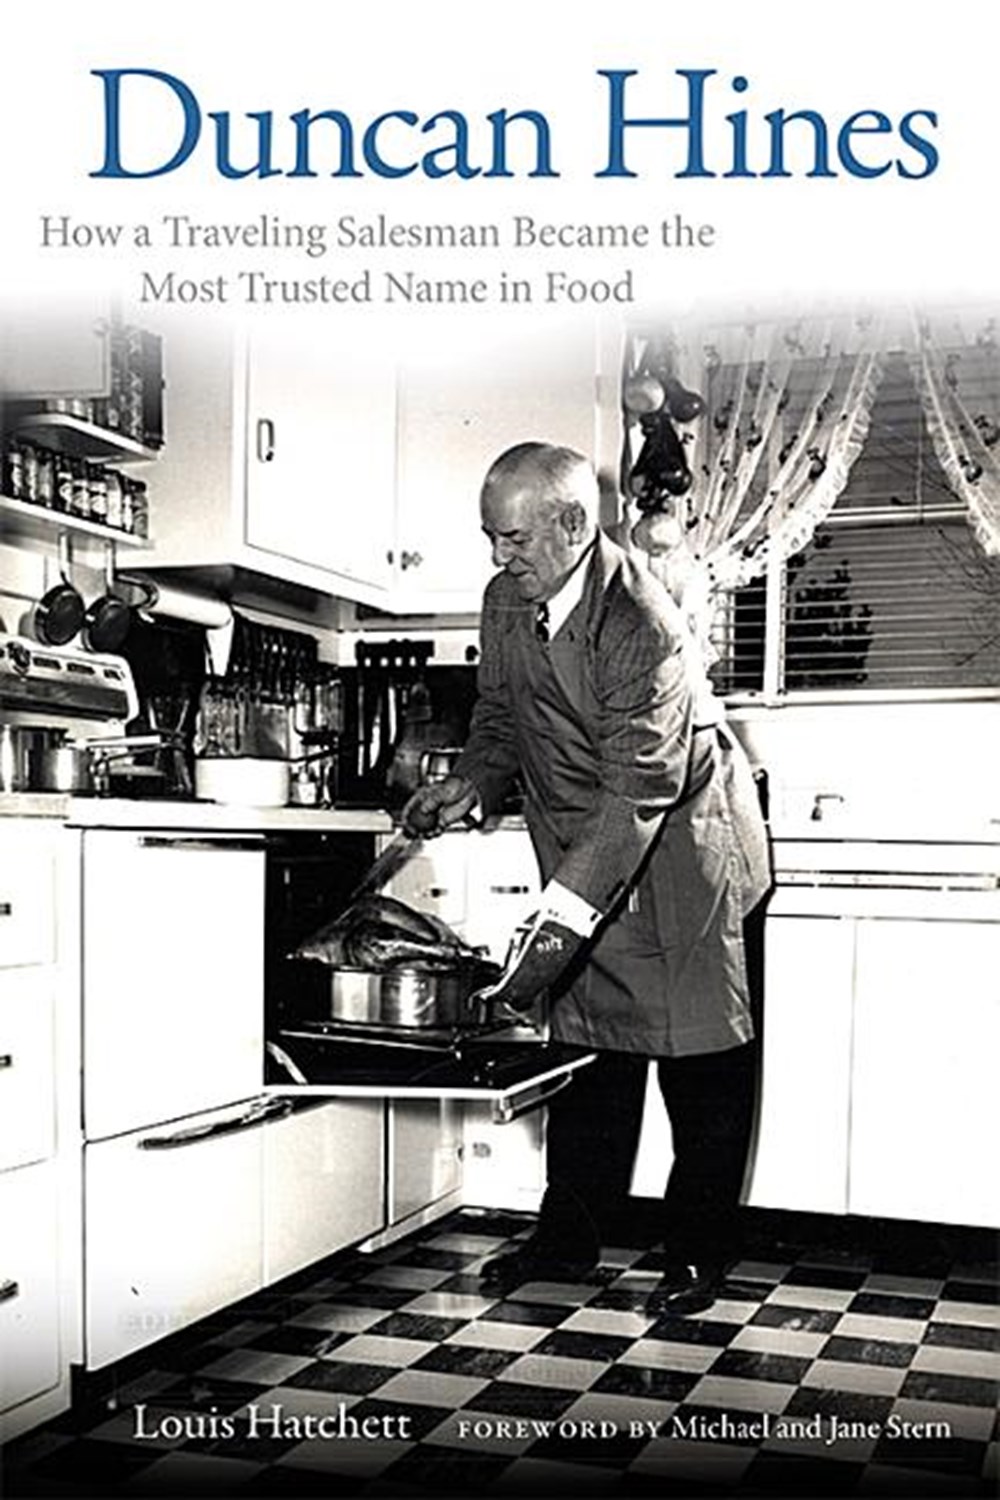 Duncan Hines How a Traveling Salesman Became the Most Trusted Name in Food